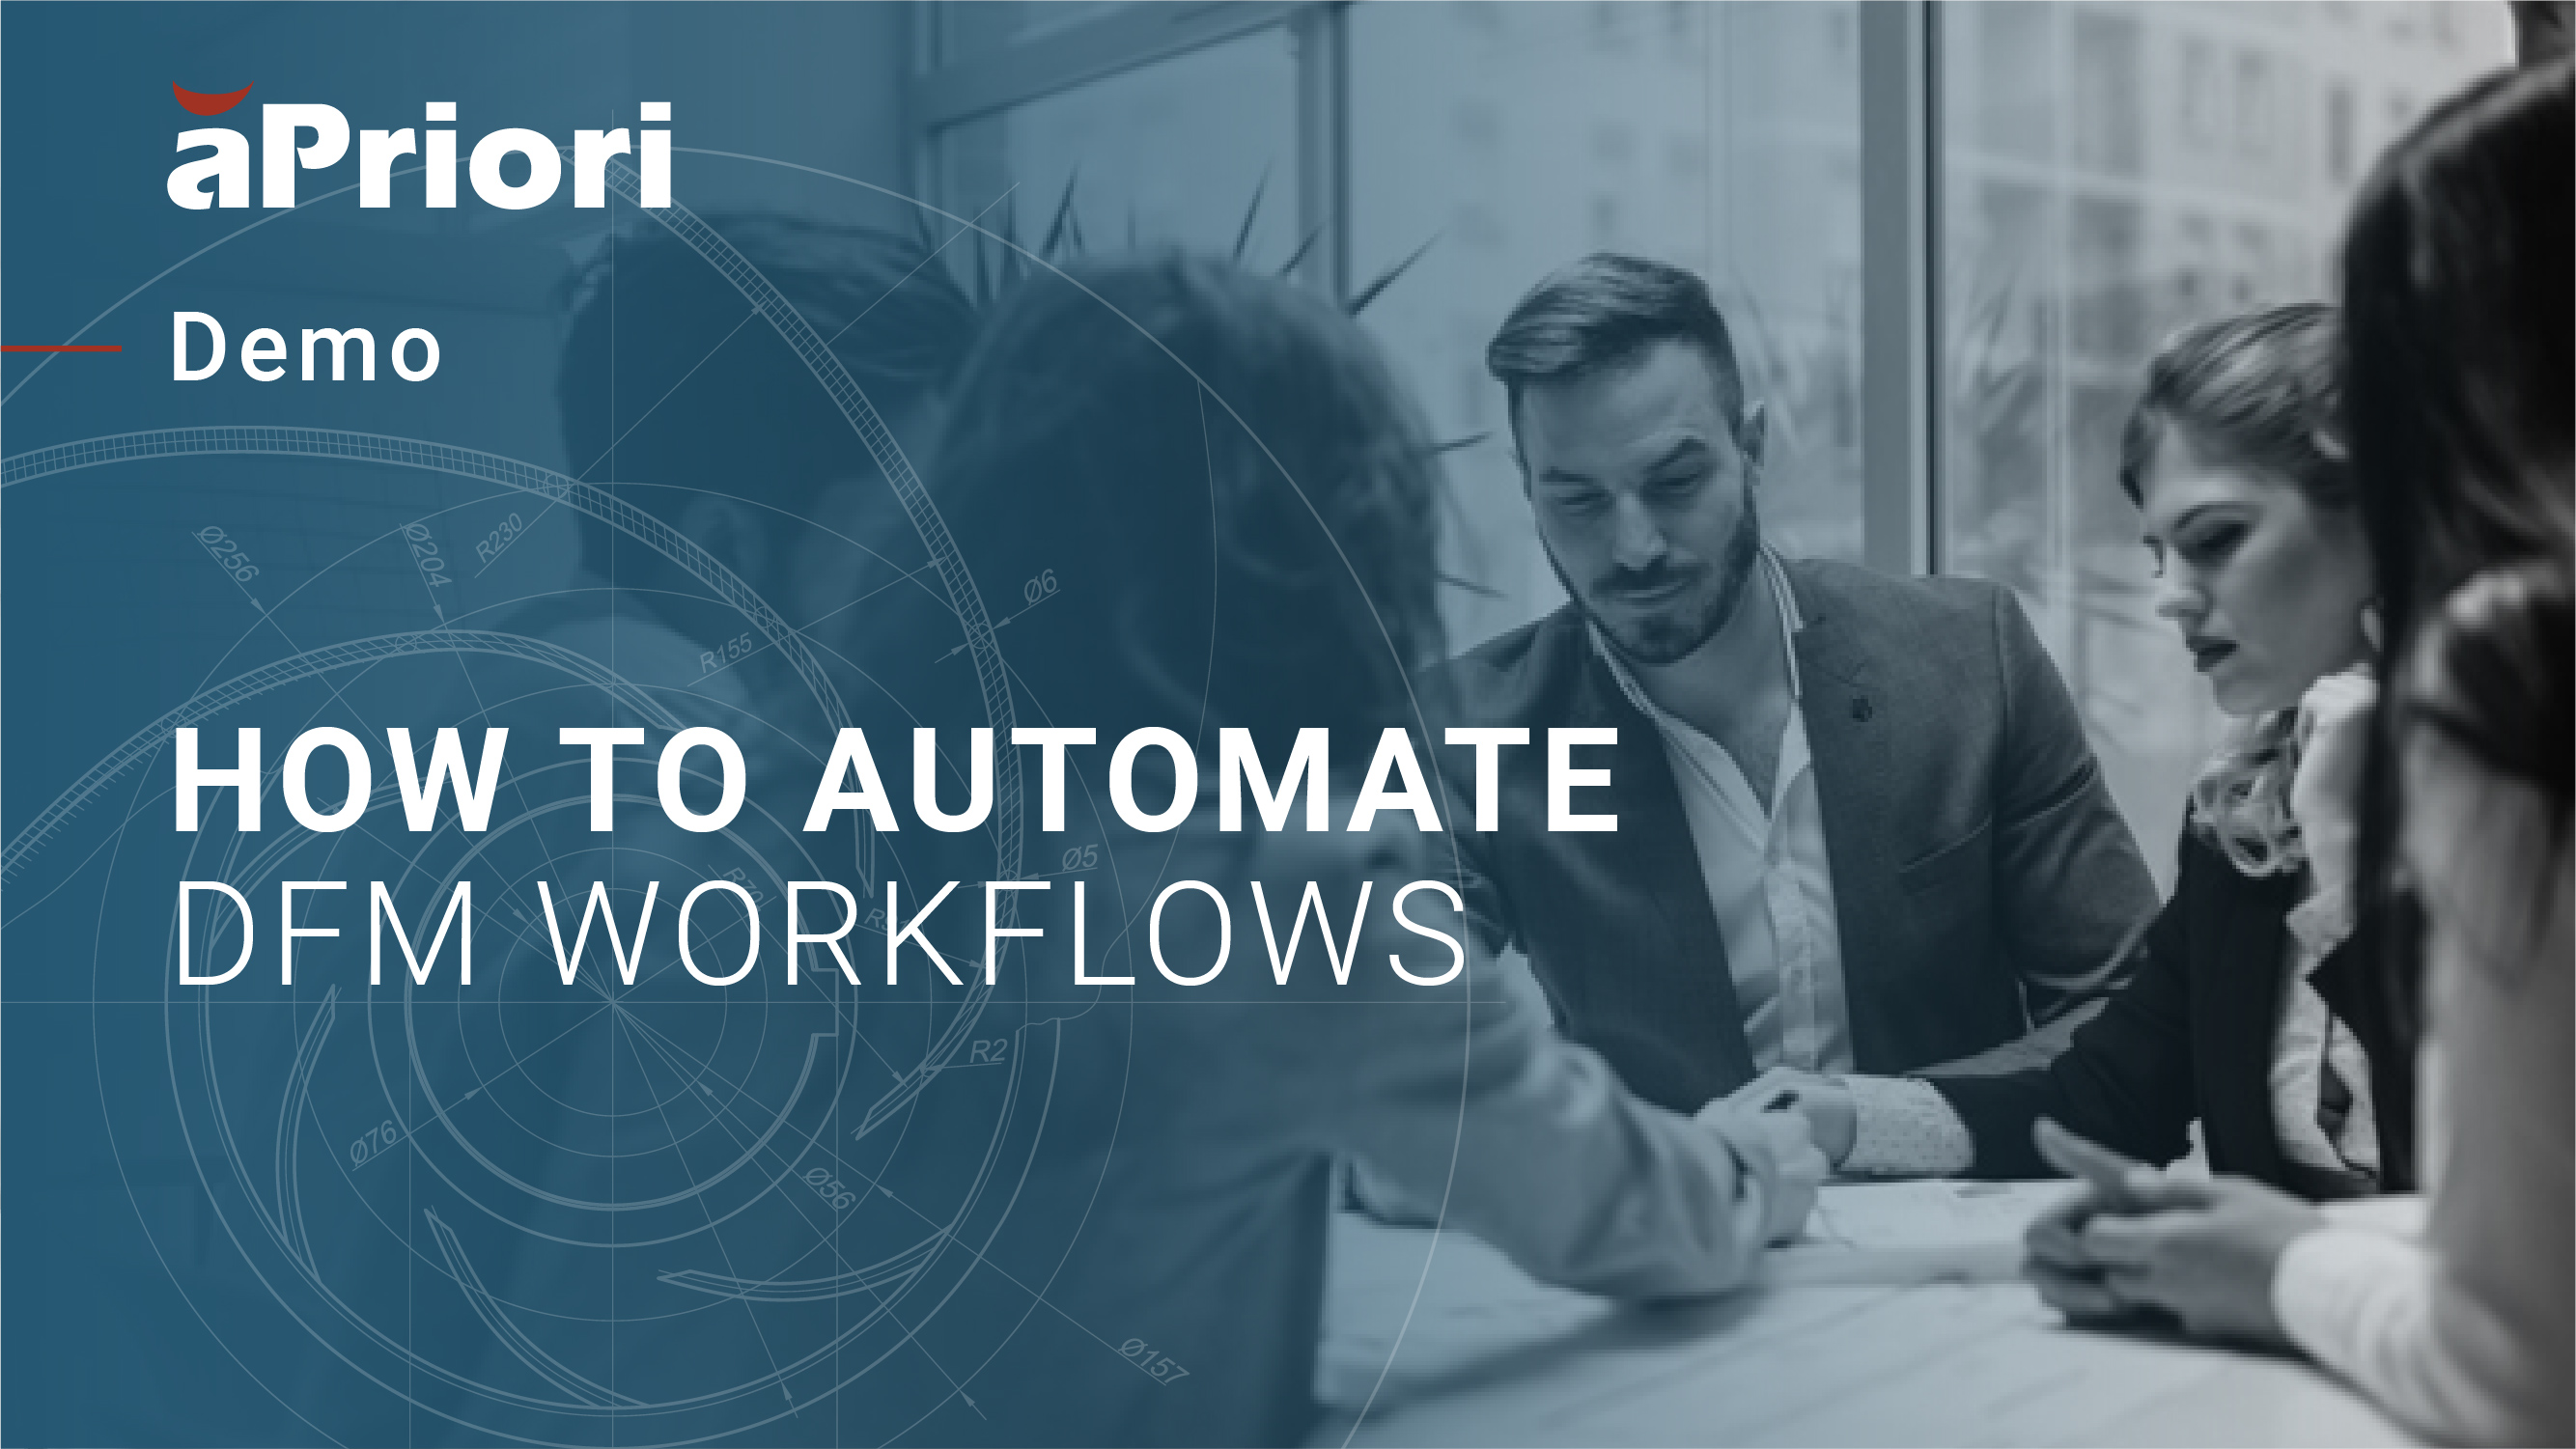 Demonstration of aPriori's Automated Workflows for Design For Manufacturing (DFM)